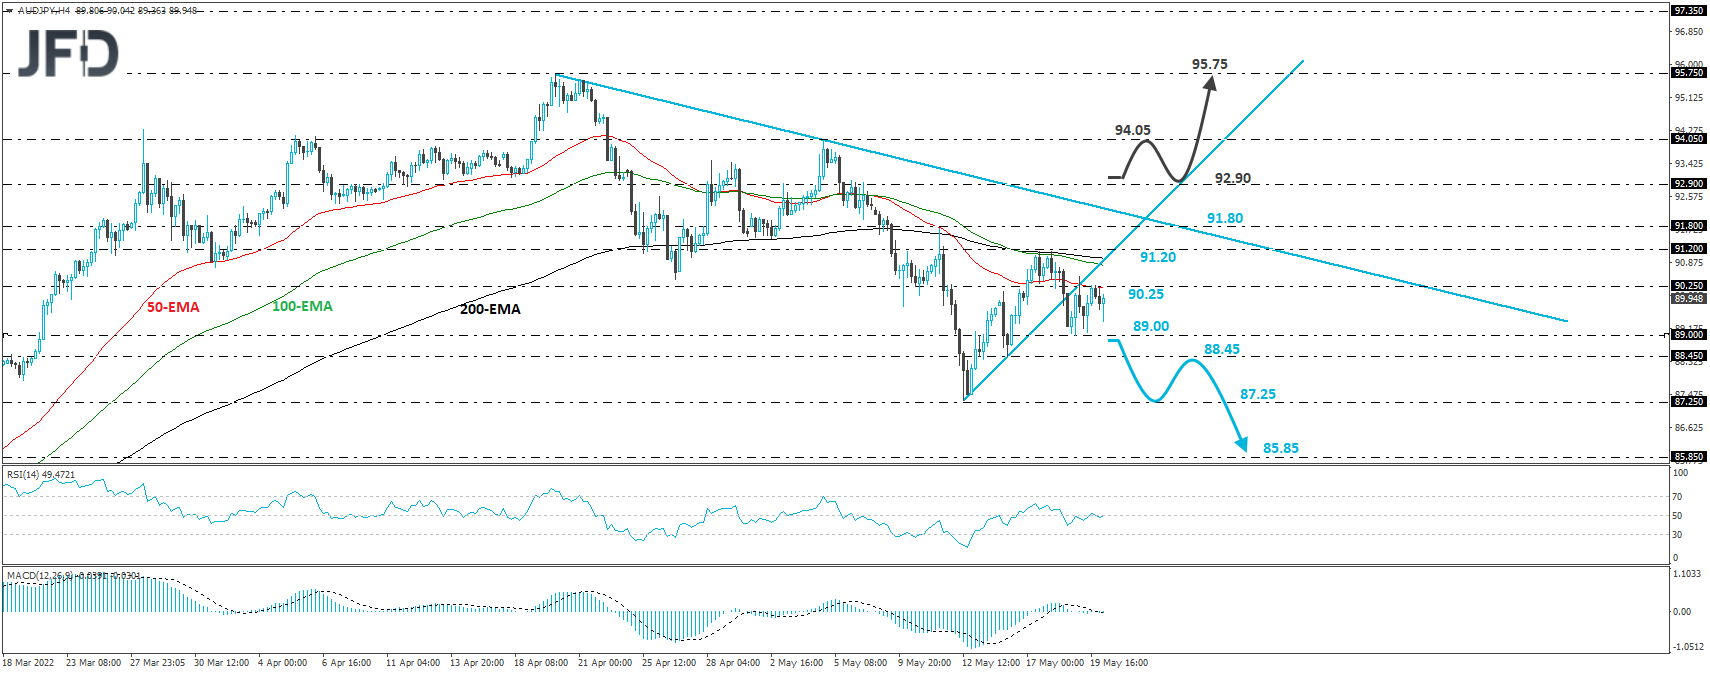 AUD/JPY 4-hour chart technical analysis.